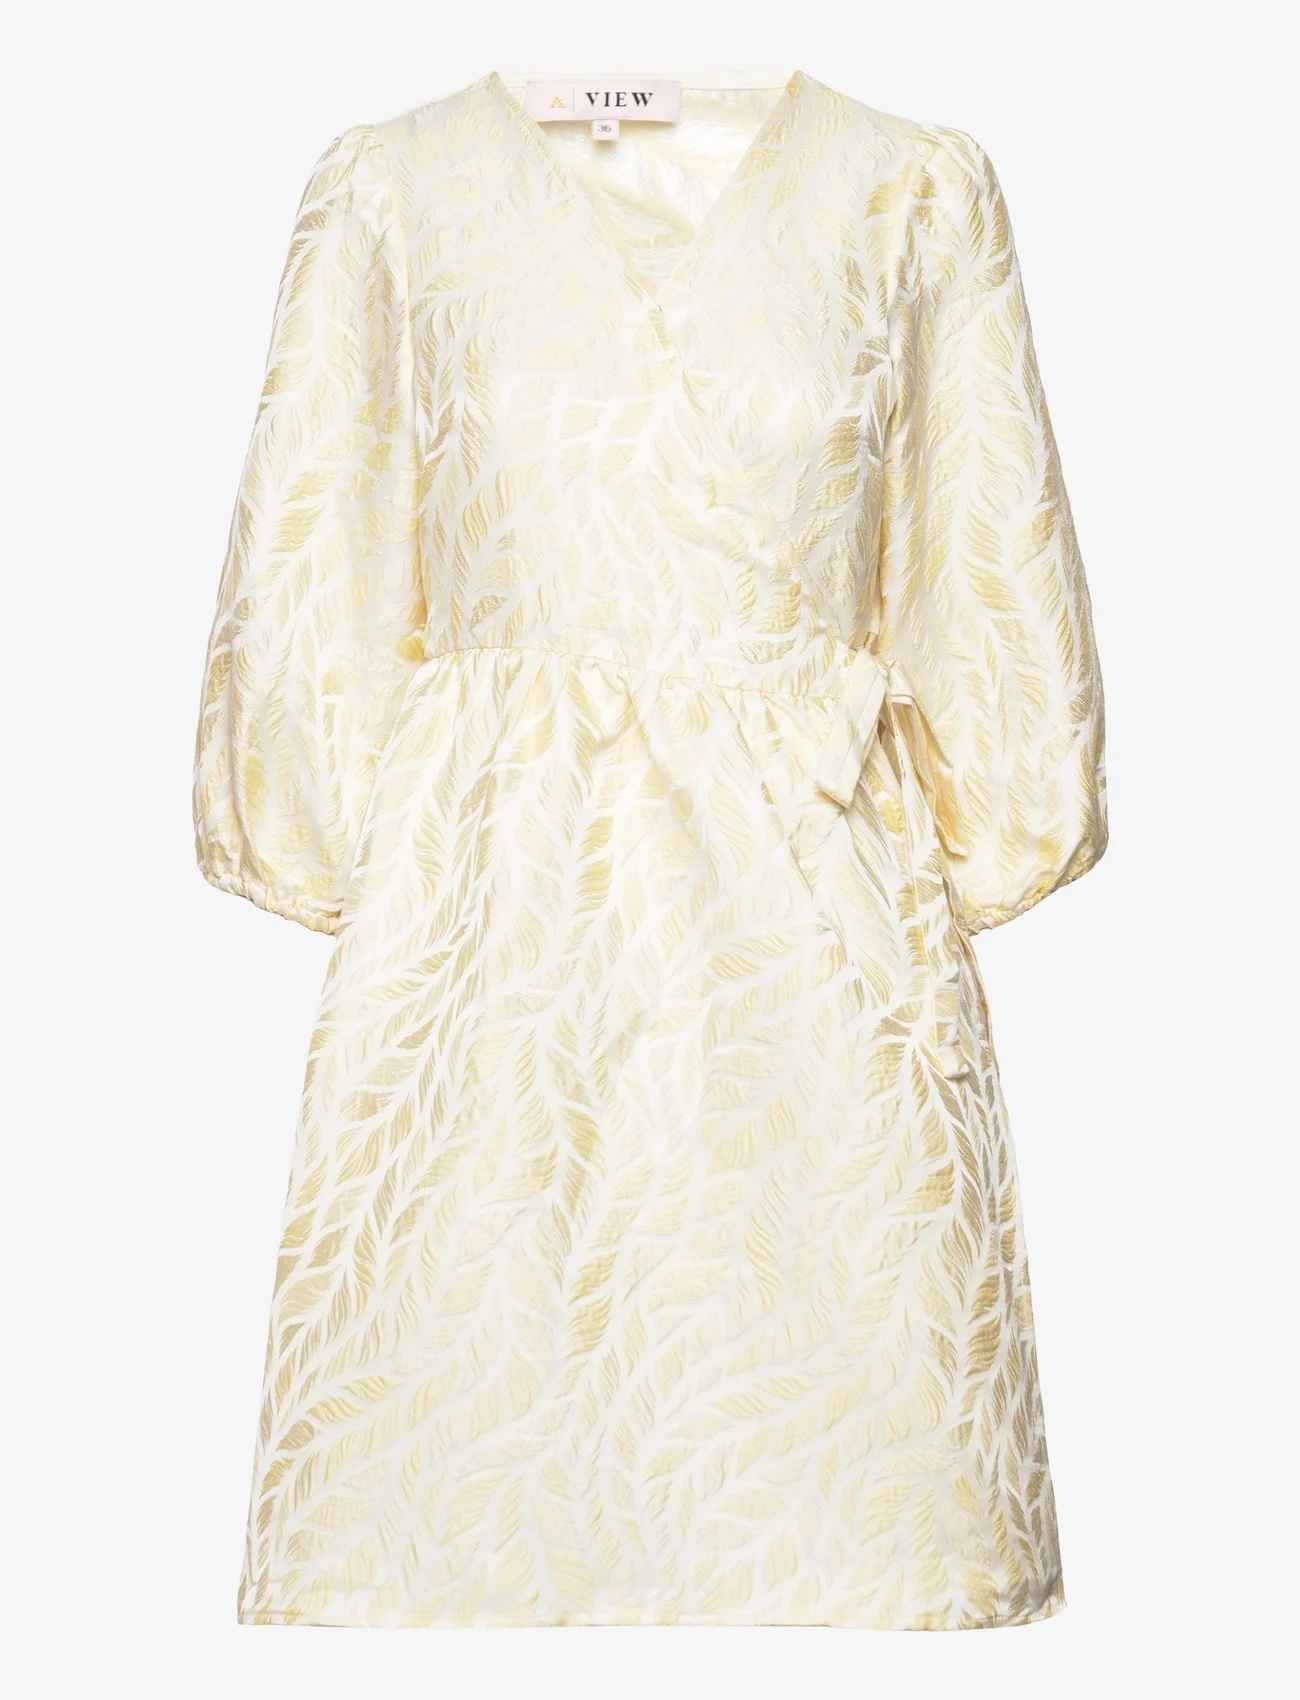 A-View - Jenny dress - party wear at outlet prices - white with yellow - 0